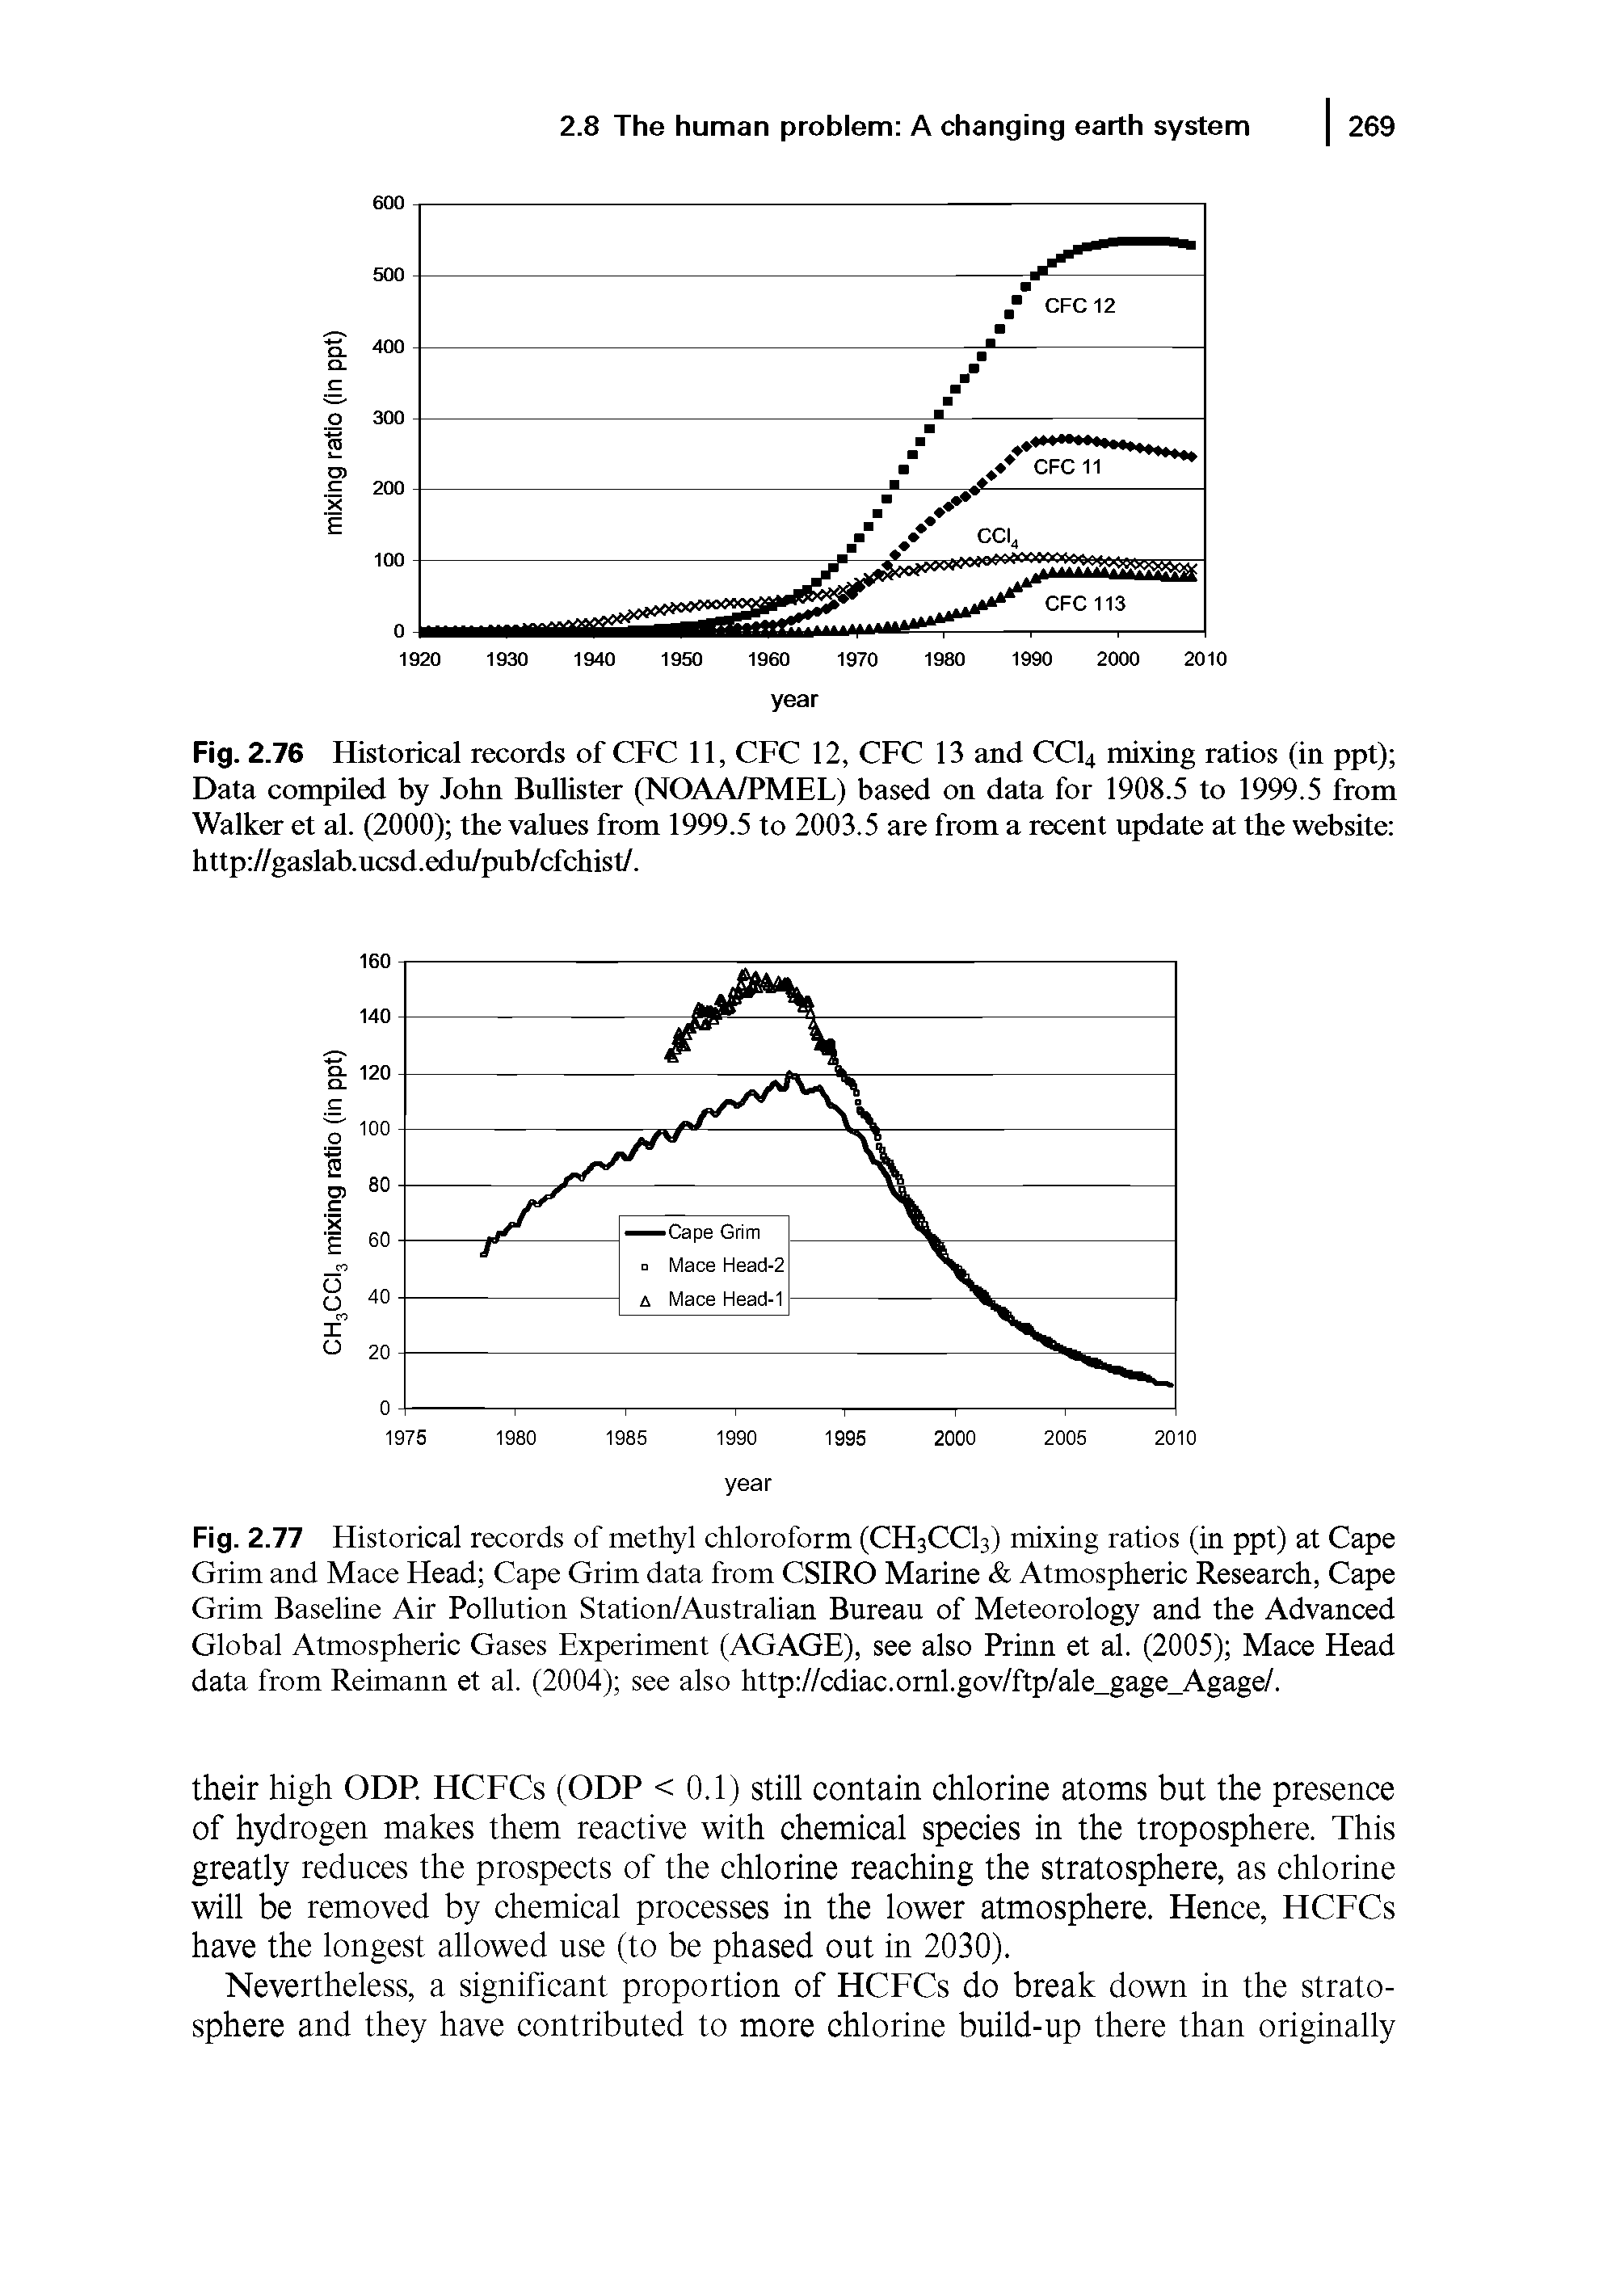 Fig. 2.77 Historical records of methyl chloroform (CH3CCI3) mixing ratios (in ppt) at Cape Grim and Mace Head Cape Grim data from CSIRO Marine Atmospheric Research, Cape Grim Baseline Air Pollntion Station/Anstralian Bureau of Meteorology and the Advanced Global Atmospheric Gases Experiment (AGAGE), see also Prinn et al. (2005) Mace Head data from Reimann et al. (2004) see also http //cdiac.oml.gov/ftp/ale gage Agage/.